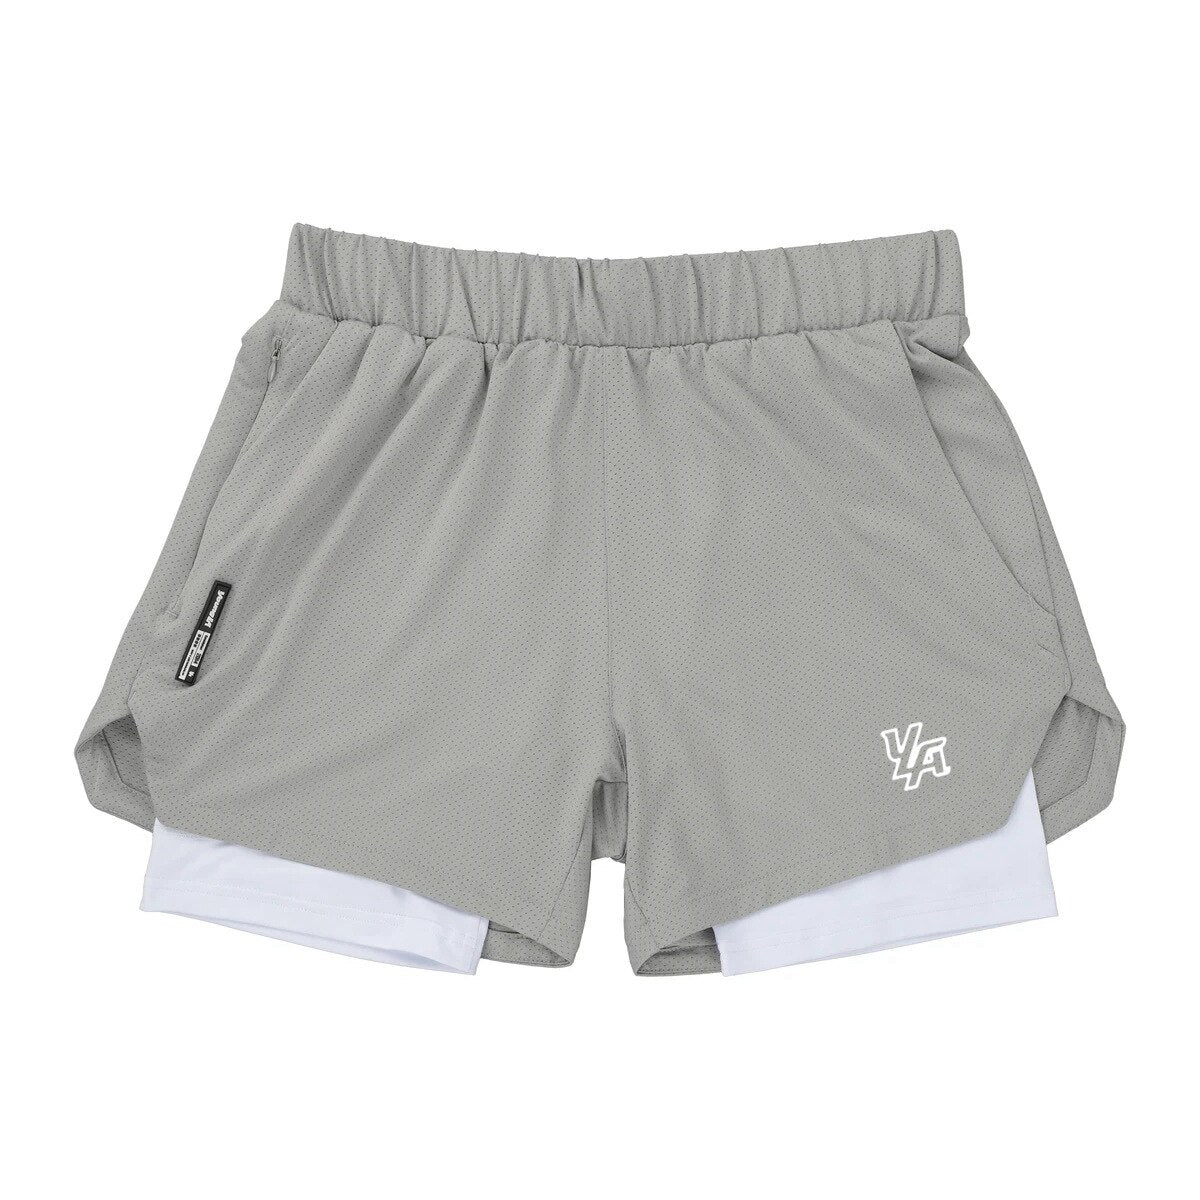 Running Shorts & Fitness Double-deck Shorts For Men